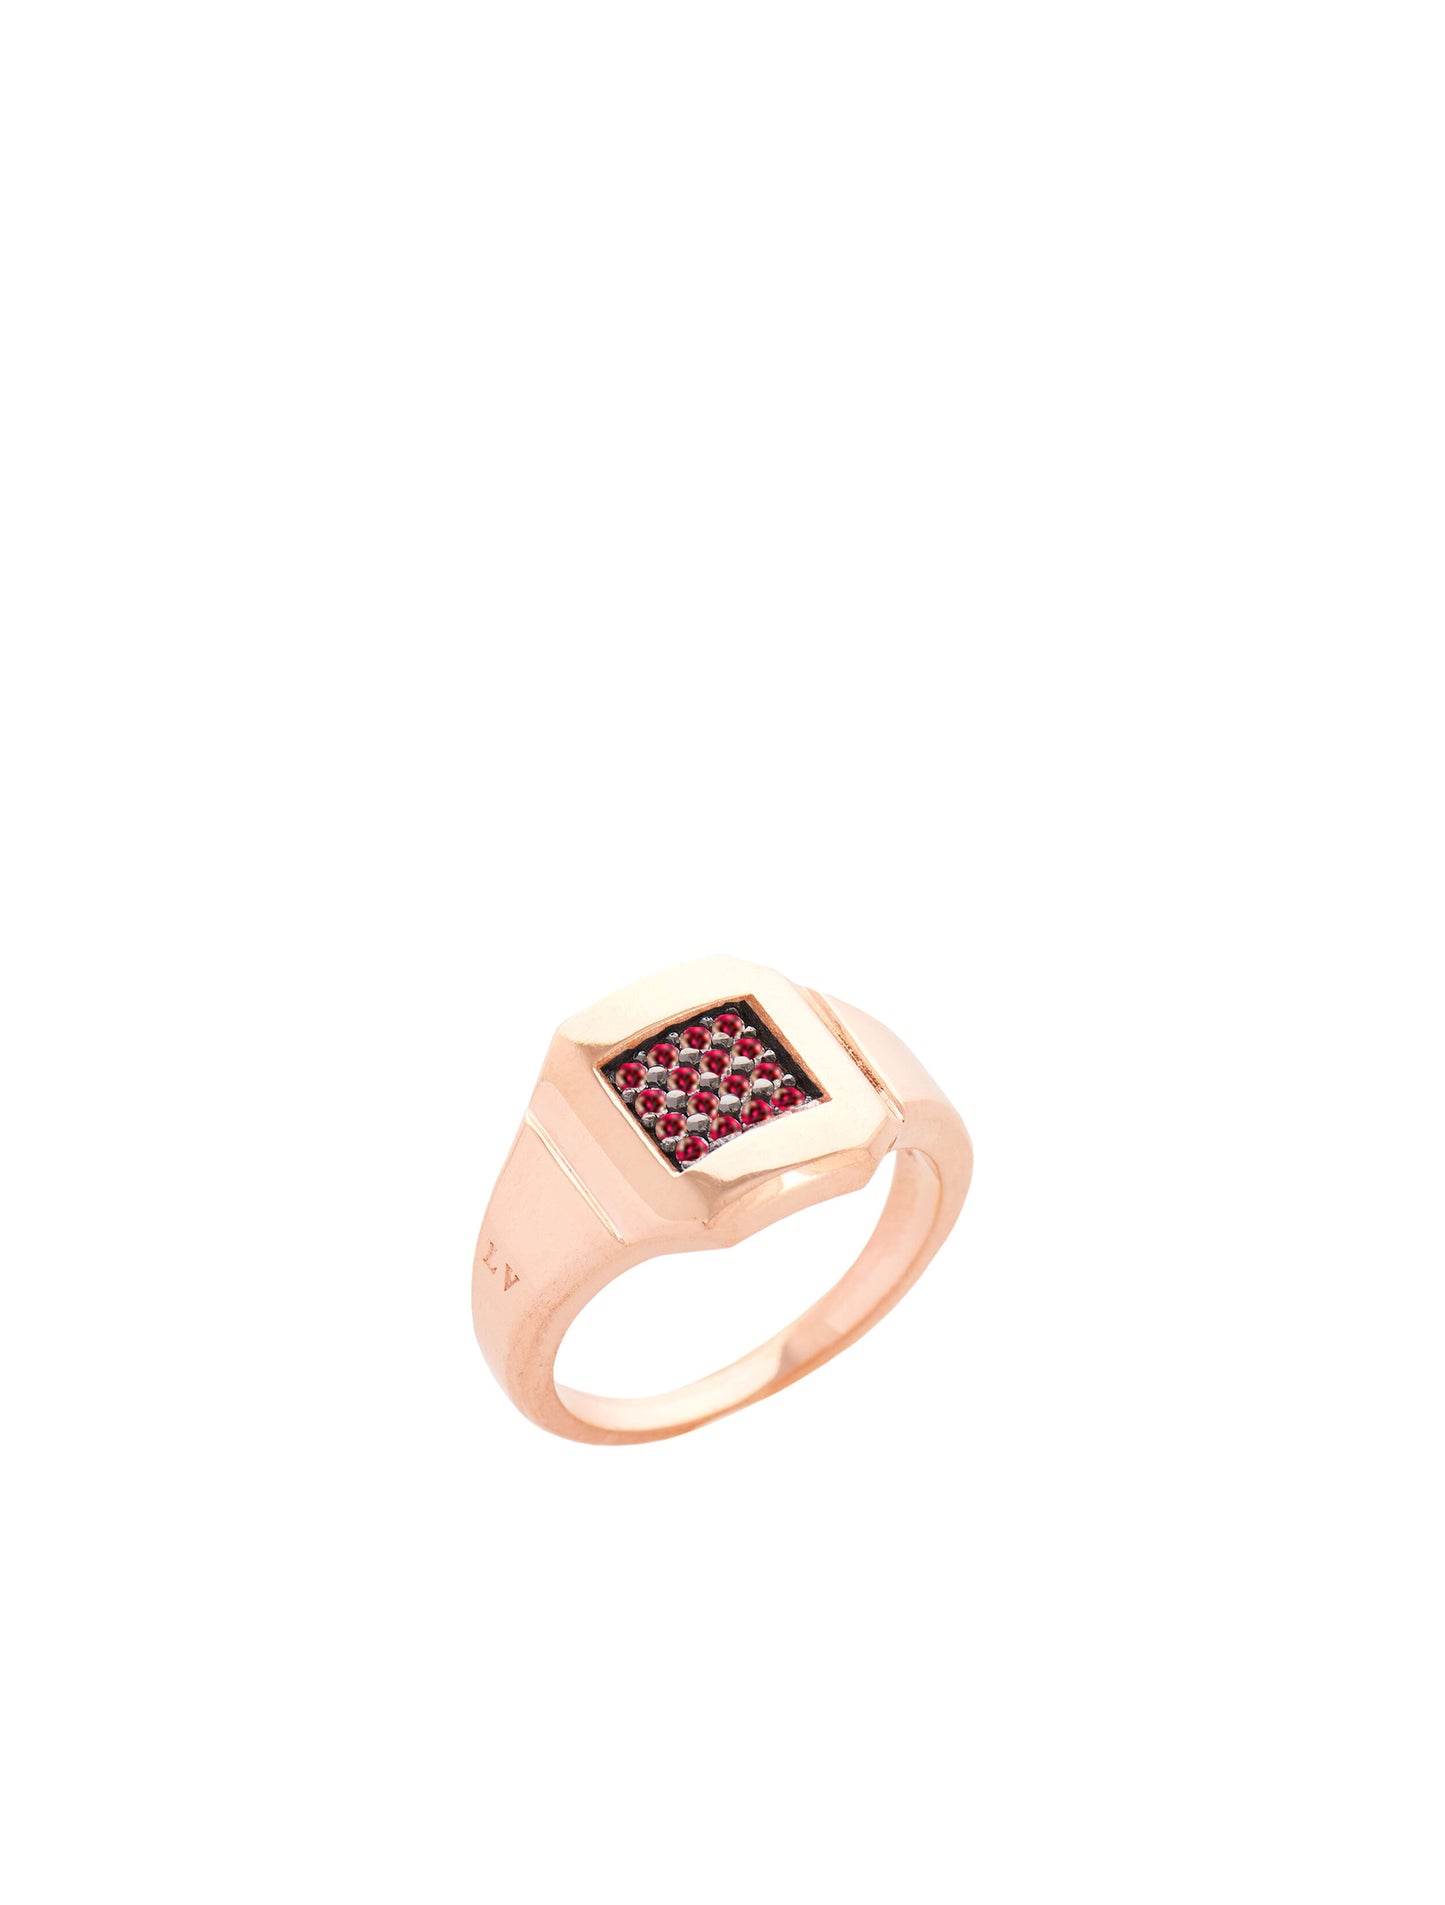 Chevalier Pave Ring with Ruby - Pink Gold Plated